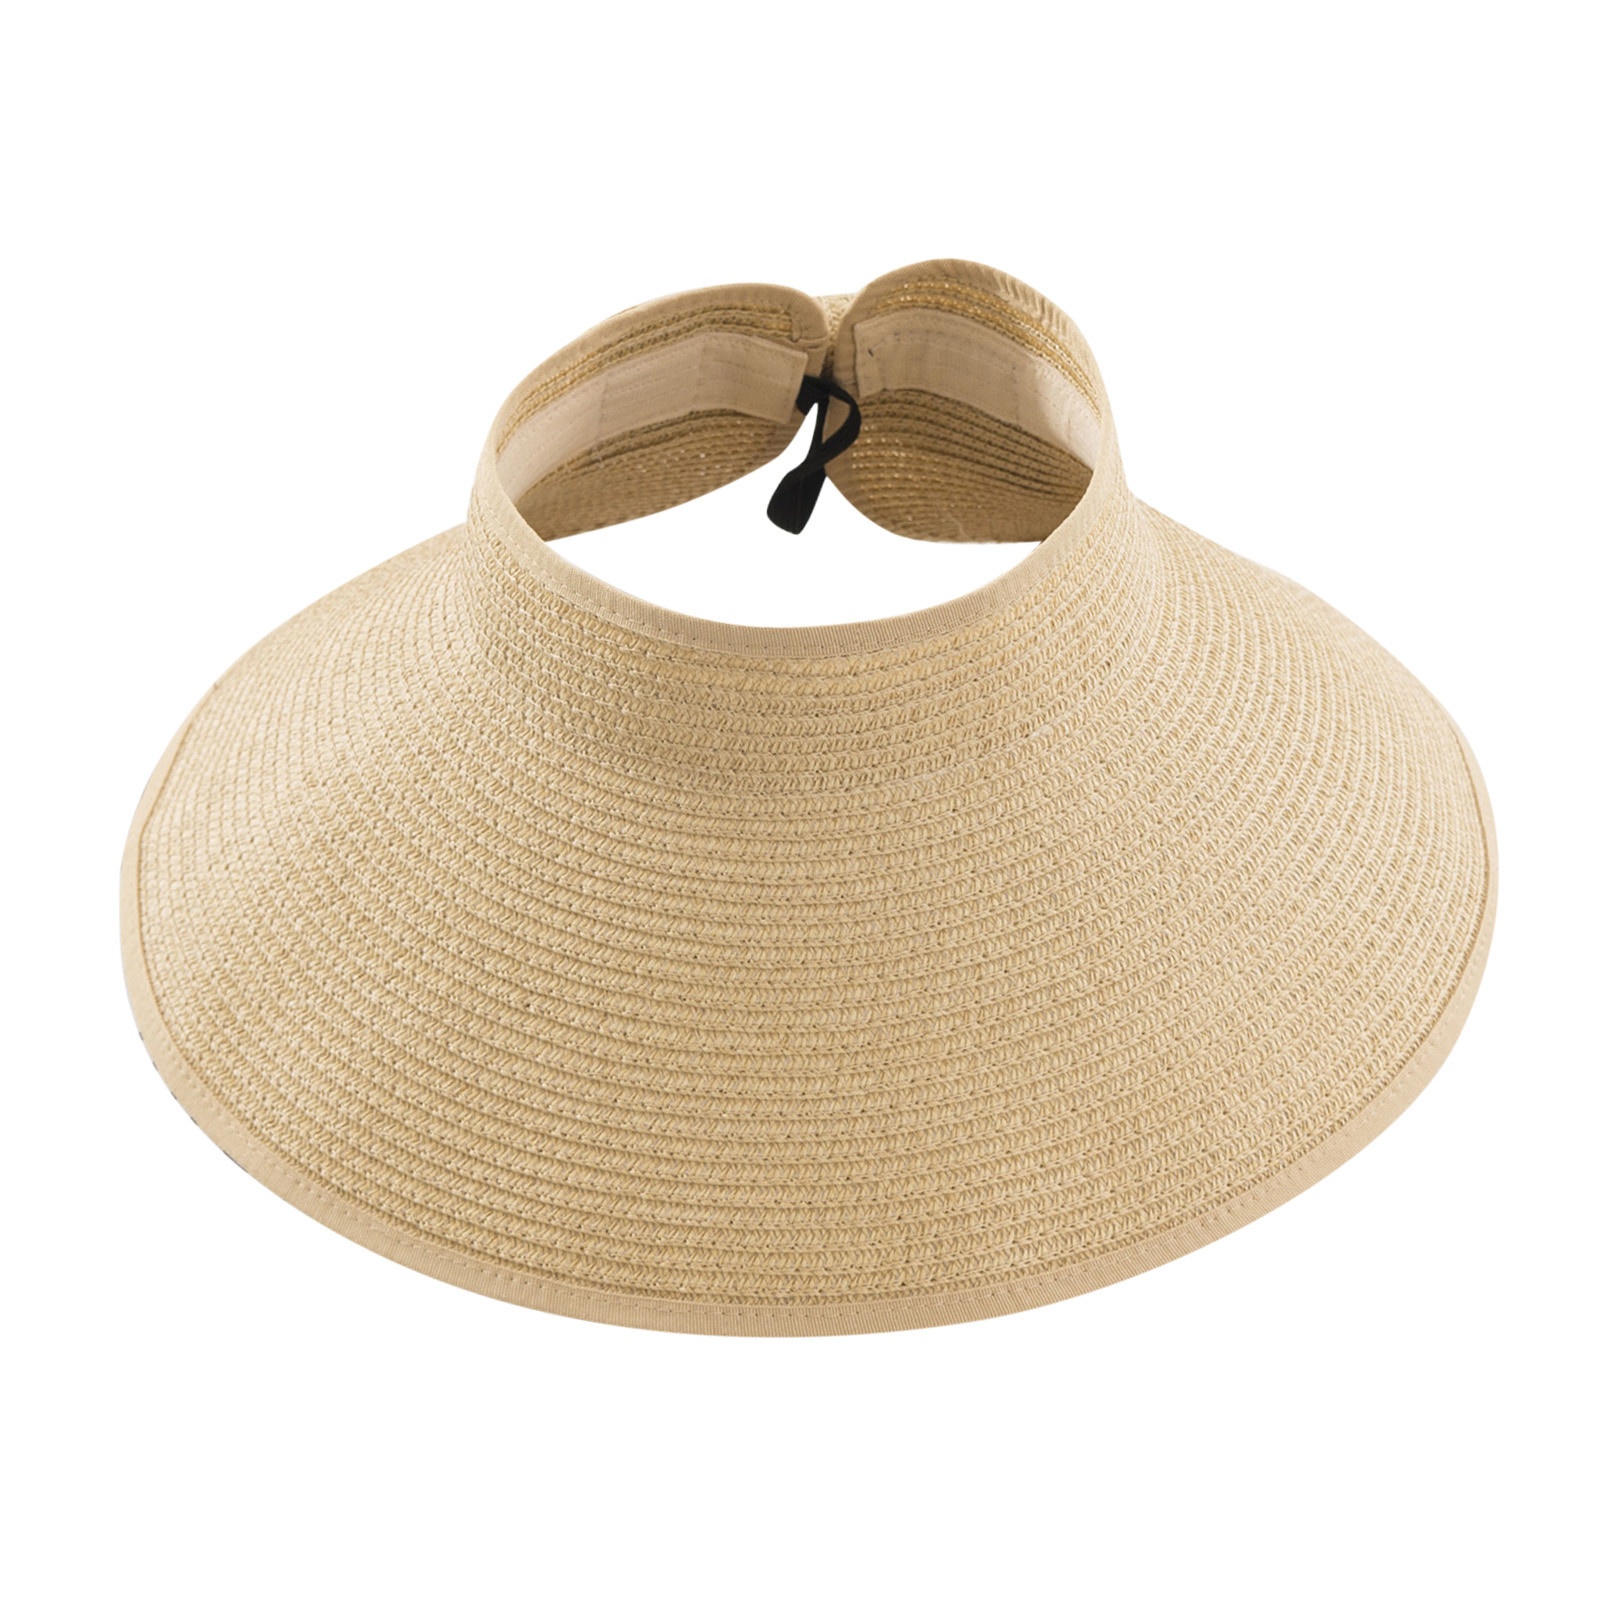 CieKen Women's Fashion Conciseness Wide Rollable Drafting Hat Sun Hat Beach Hat - image 1 of 3